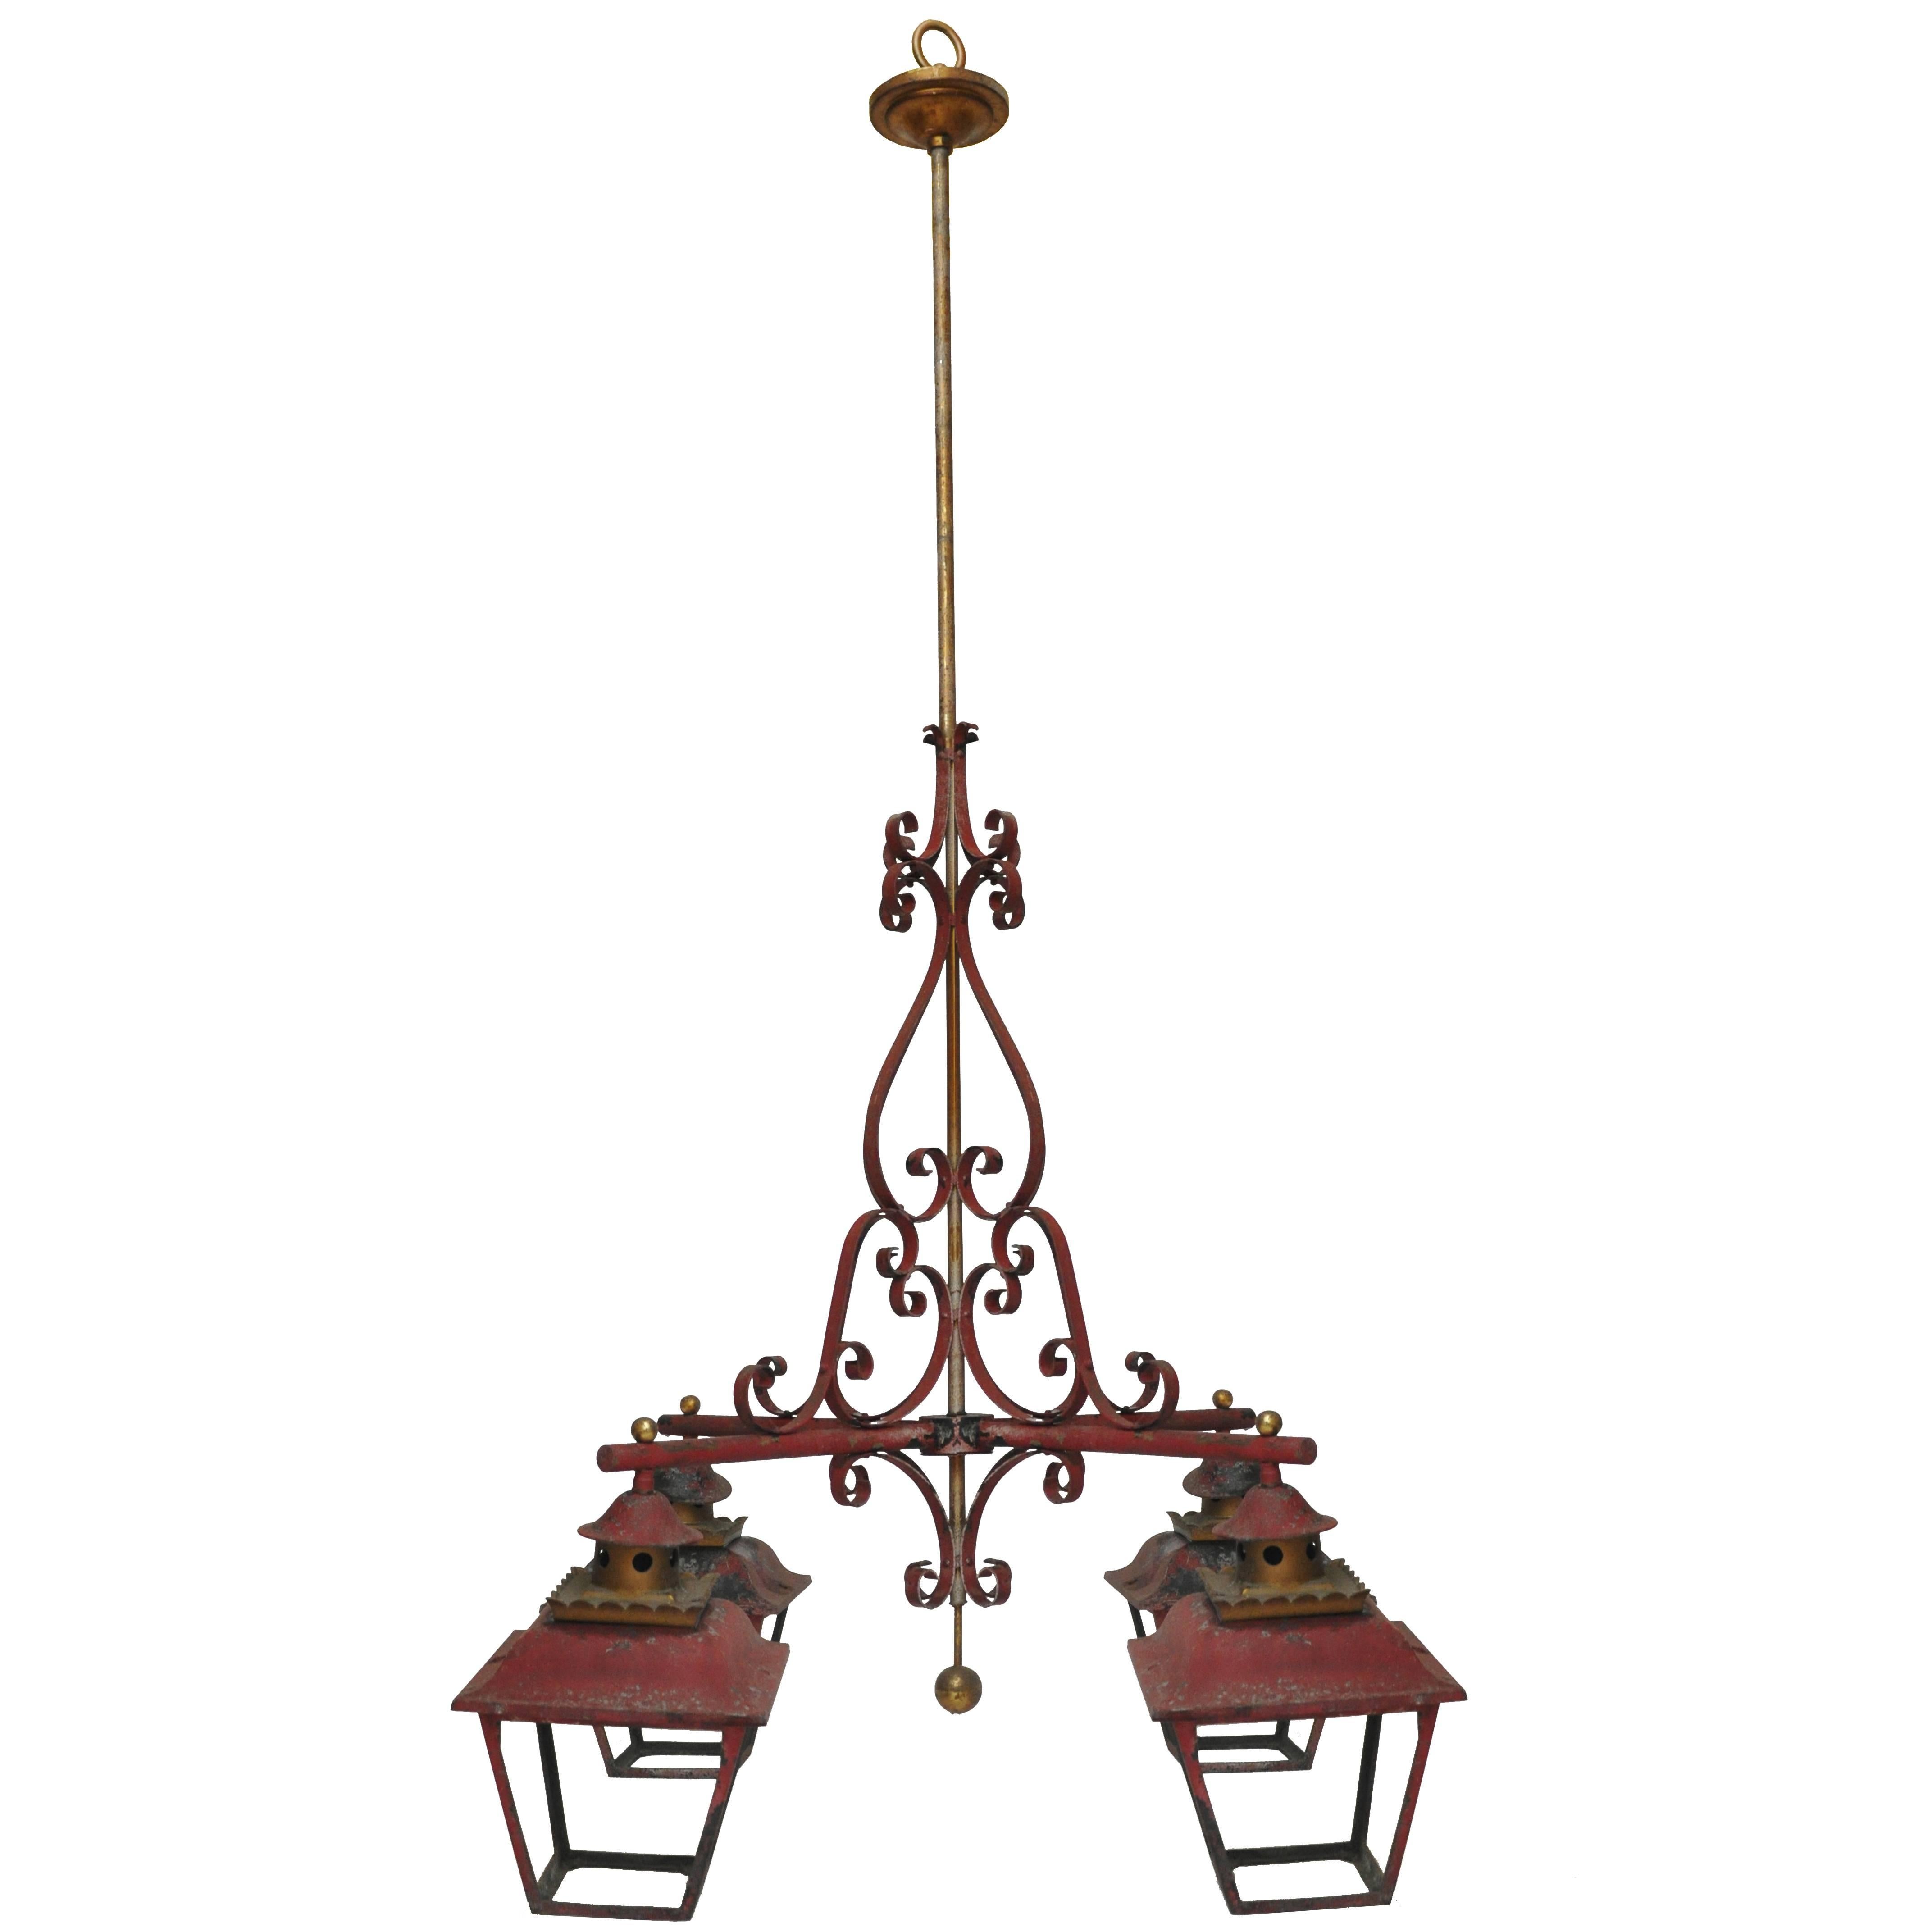 Large-Scale French Chinoiserie Style Four Lantern Hanging Light For Sale